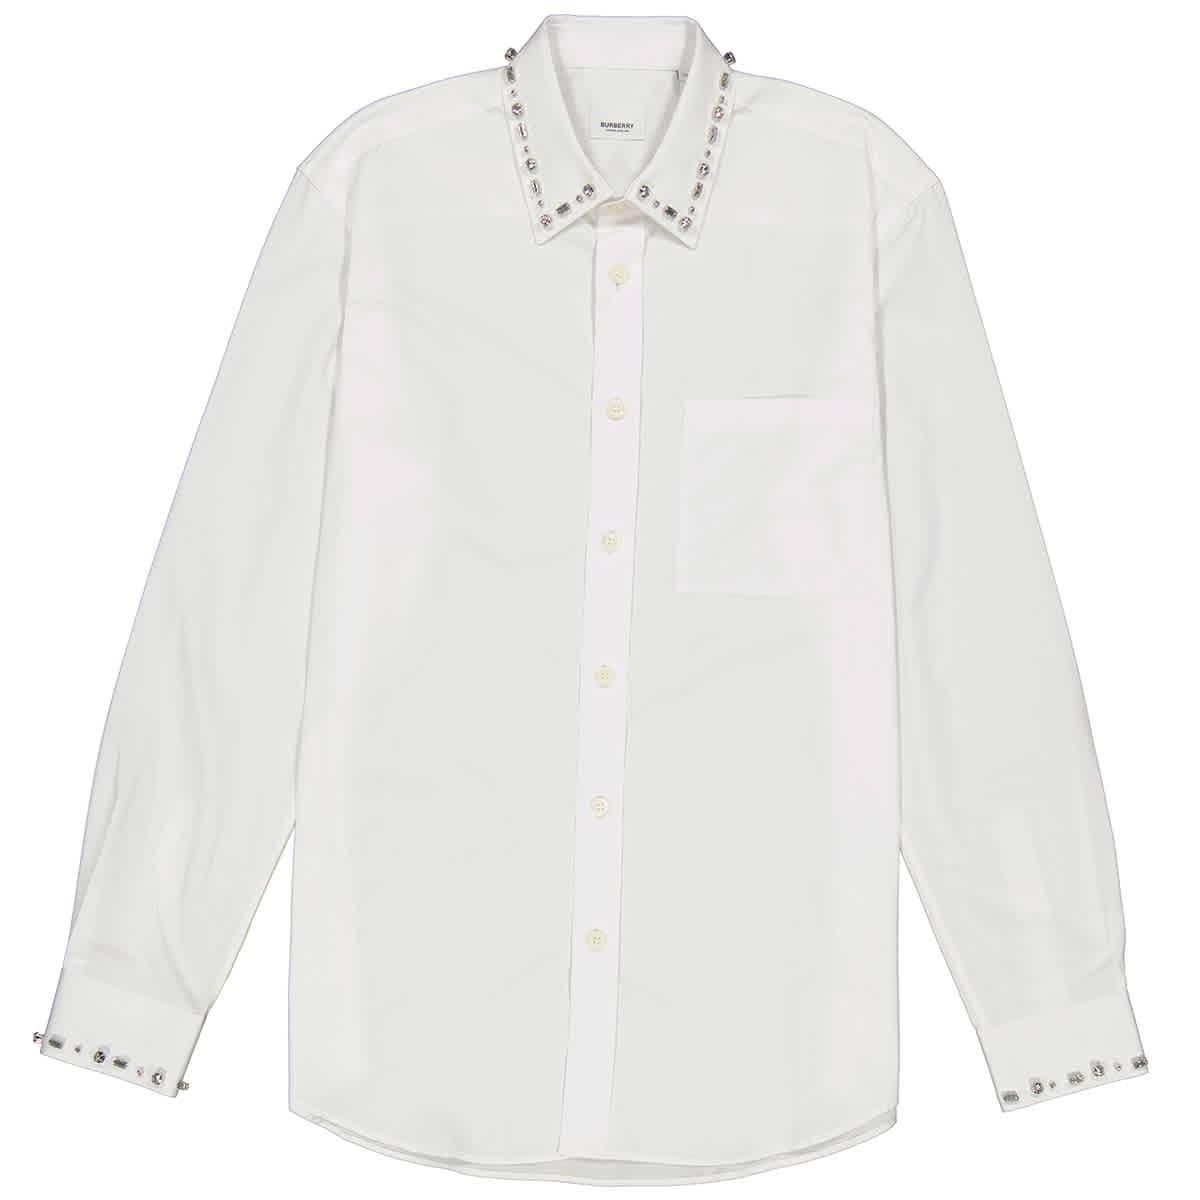 Burberry Mens White Clacton Classic Fit Embellished Cotton Poplin Dress Shirt by BURBERRY